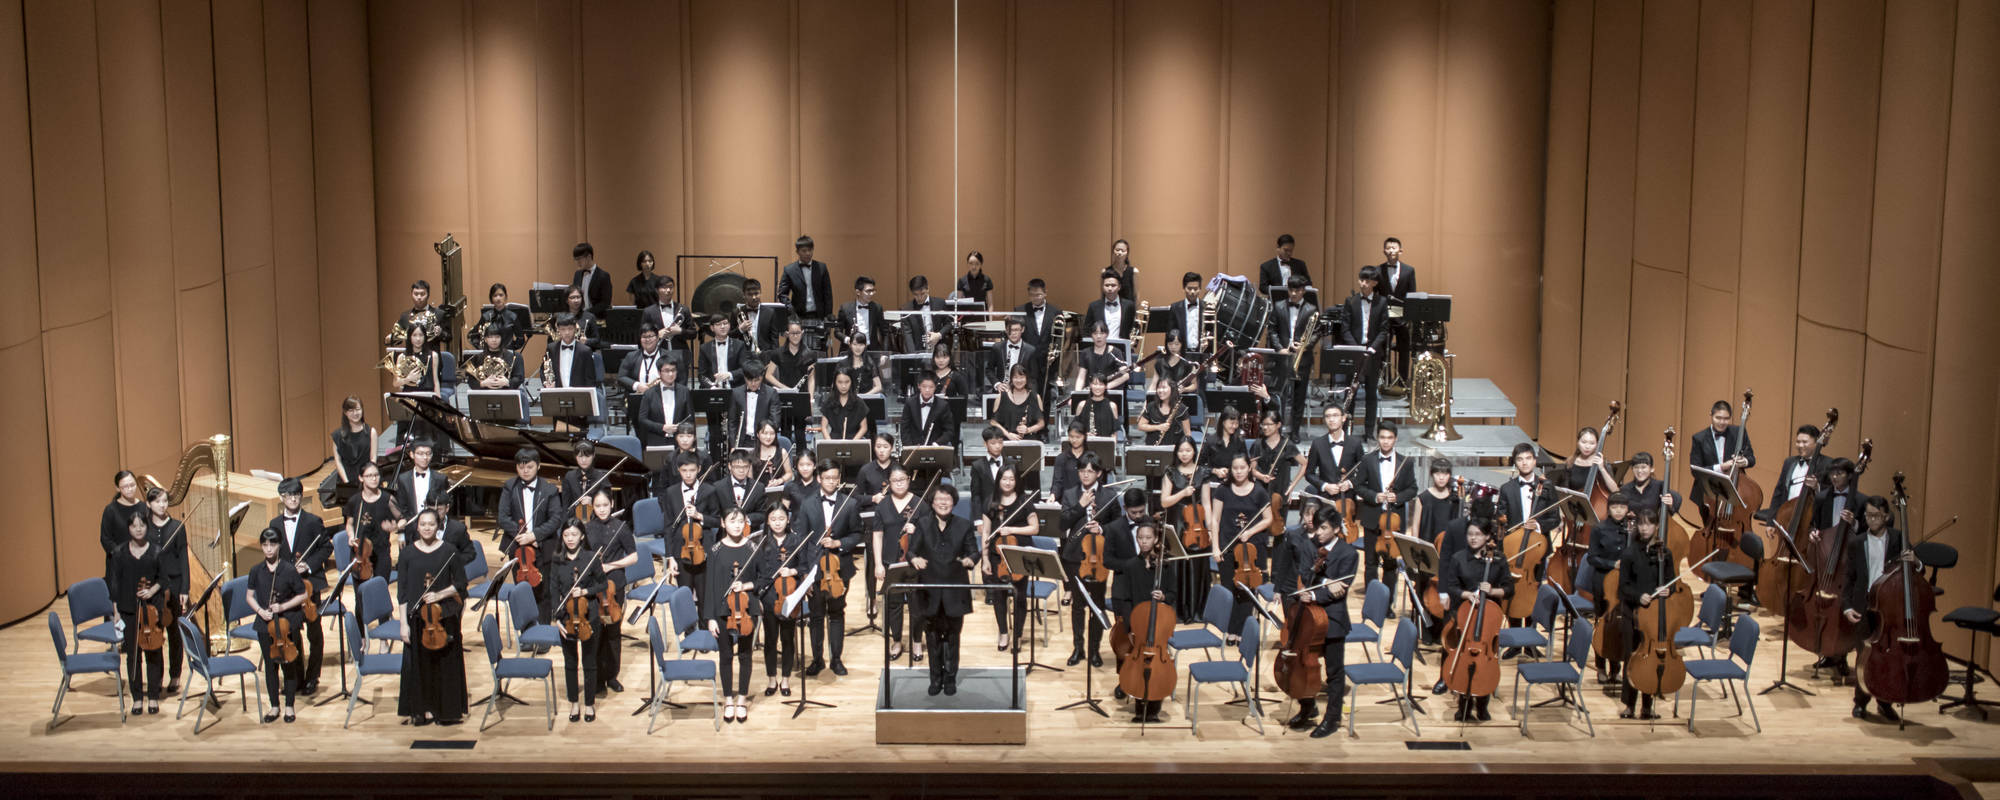 2019 NTSO International Youth Orchestra Camp Concert